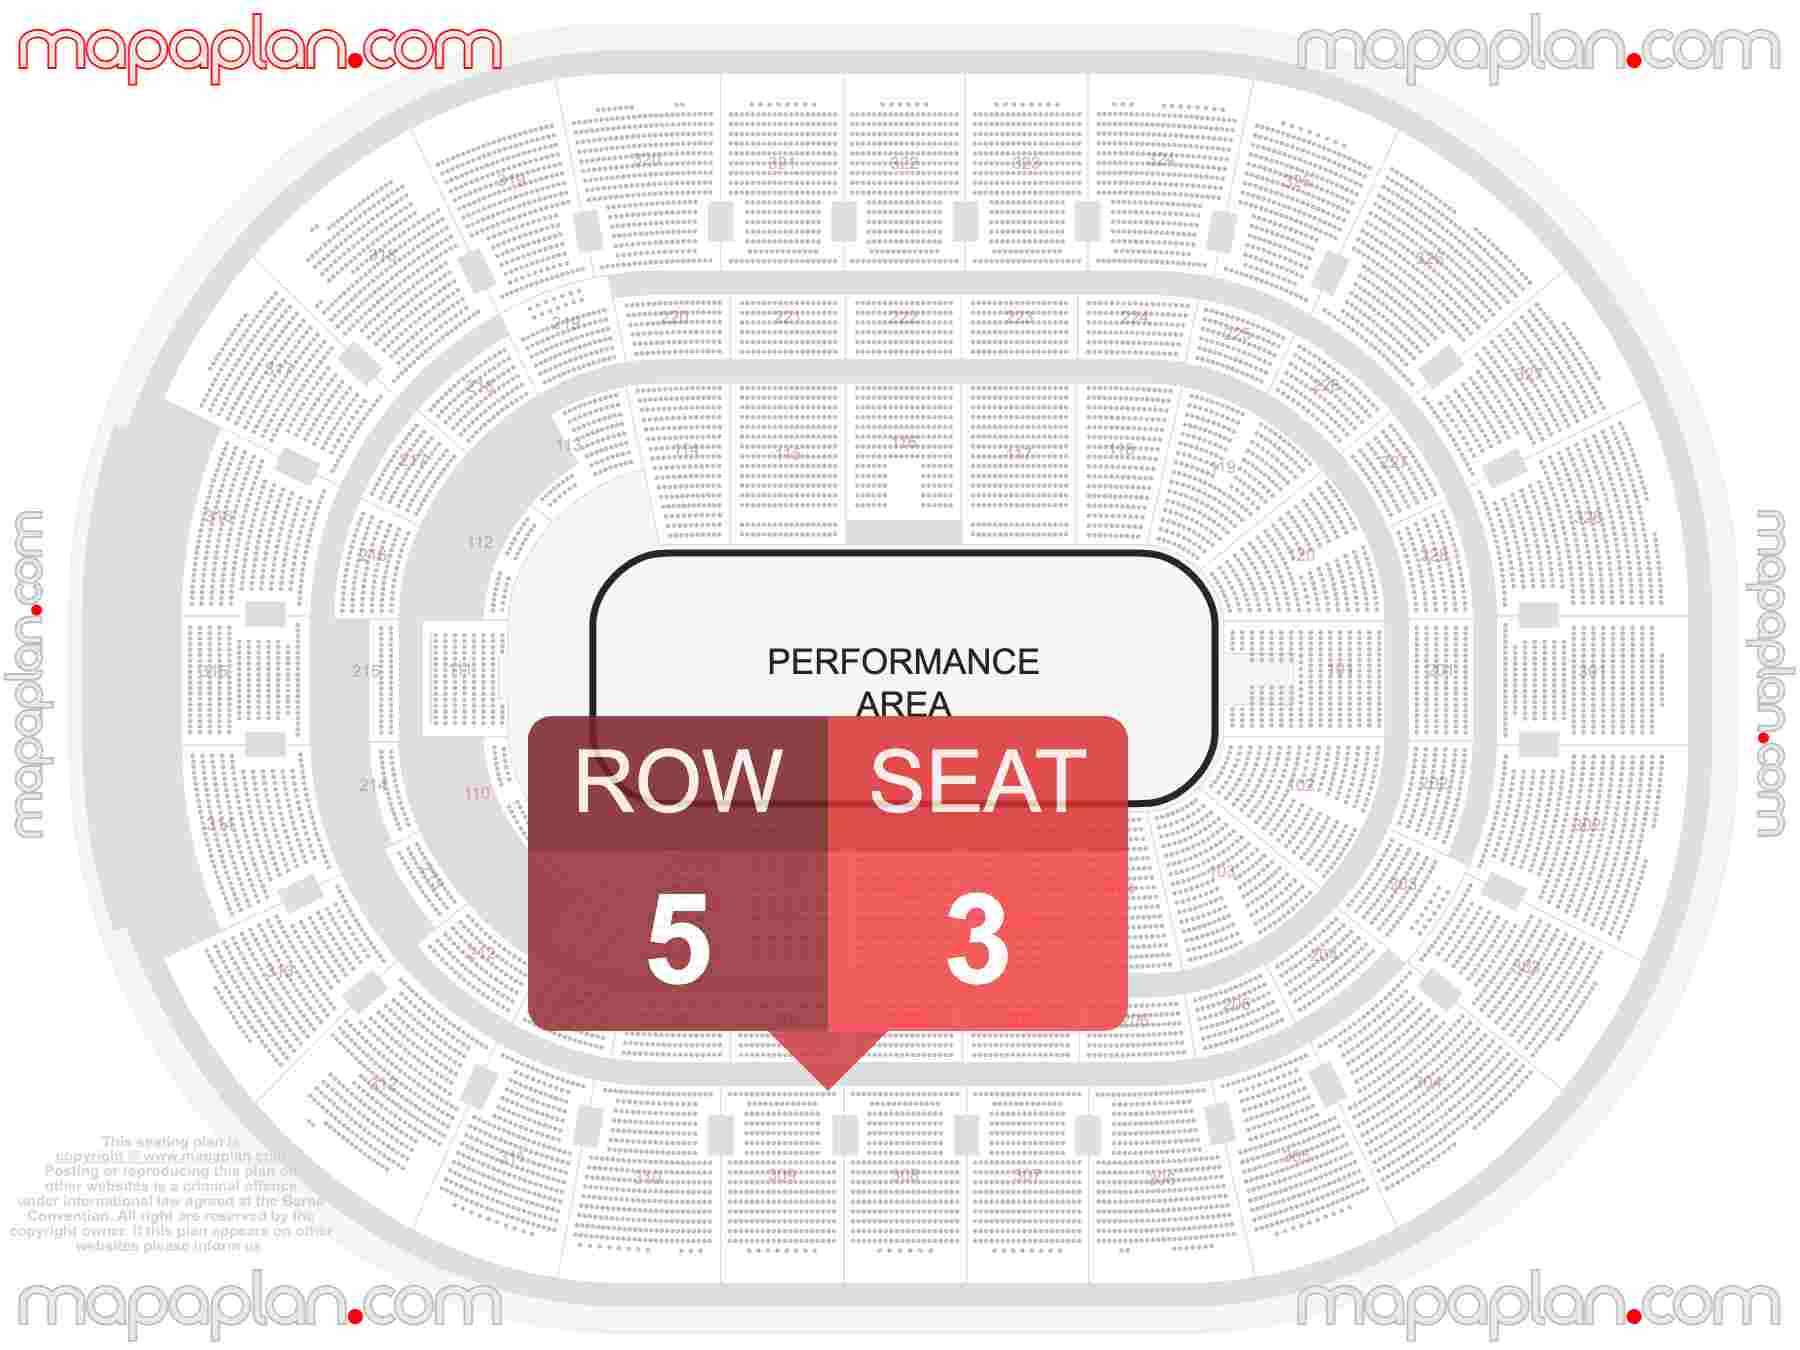 Ottawa Canadian Tire Centre seating map Monster Jam trucks precise seat finder - Explore seating map with exact section, seat and row numbers